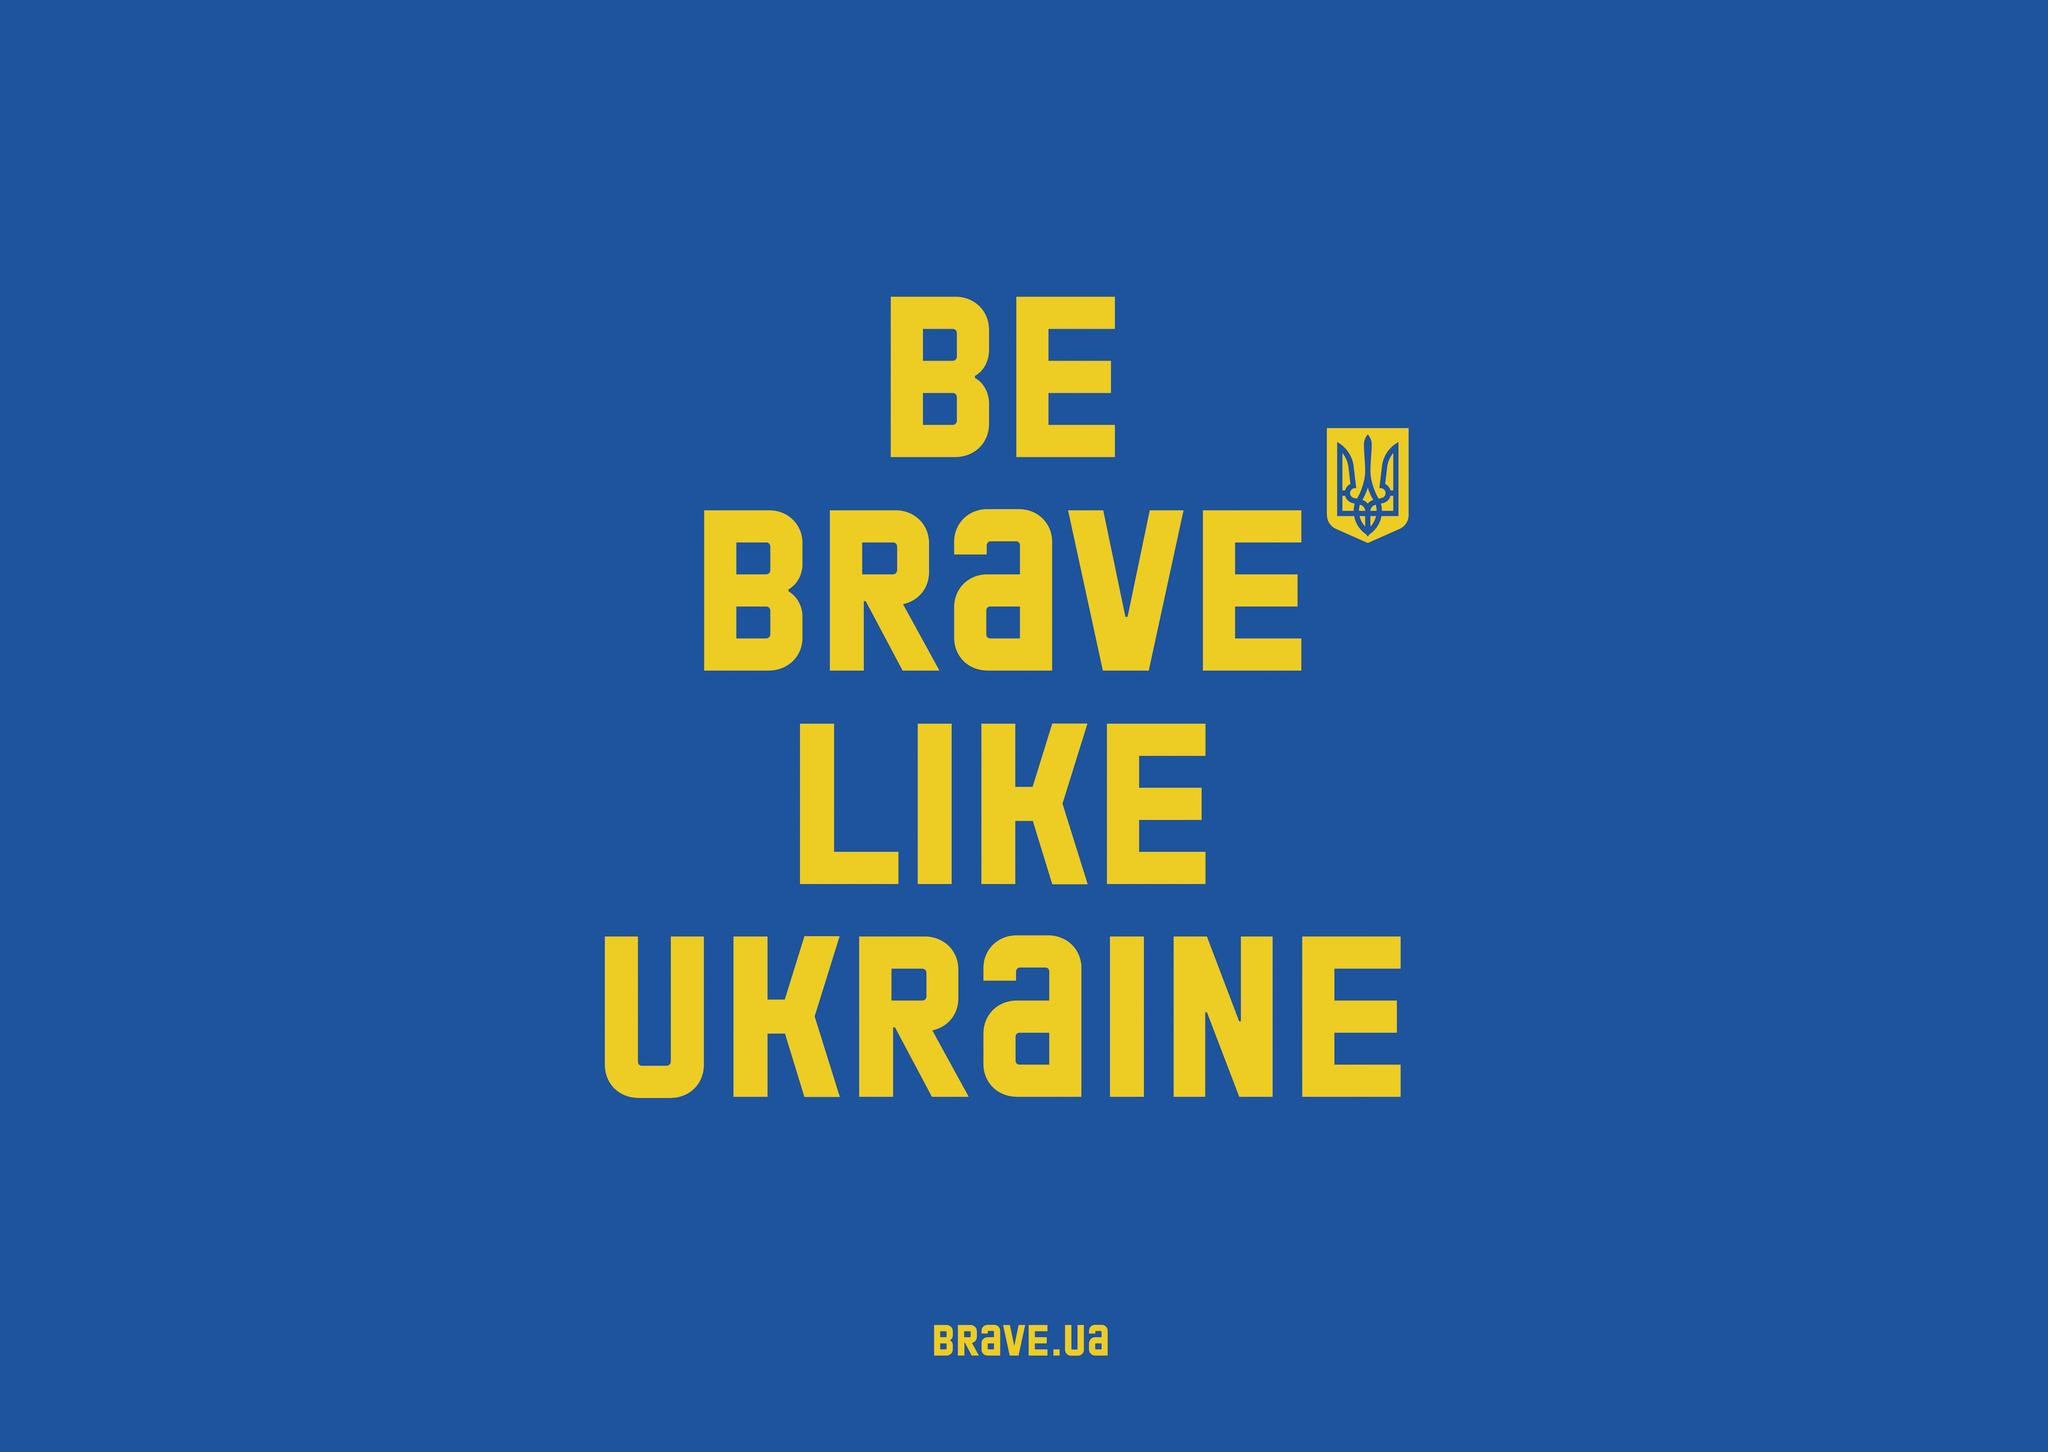 BE BRAVE LIKE UKRAINE. THE LARGEST OUTDOOR CAMPAIGN IN THE HISTORY OF UKRAINE